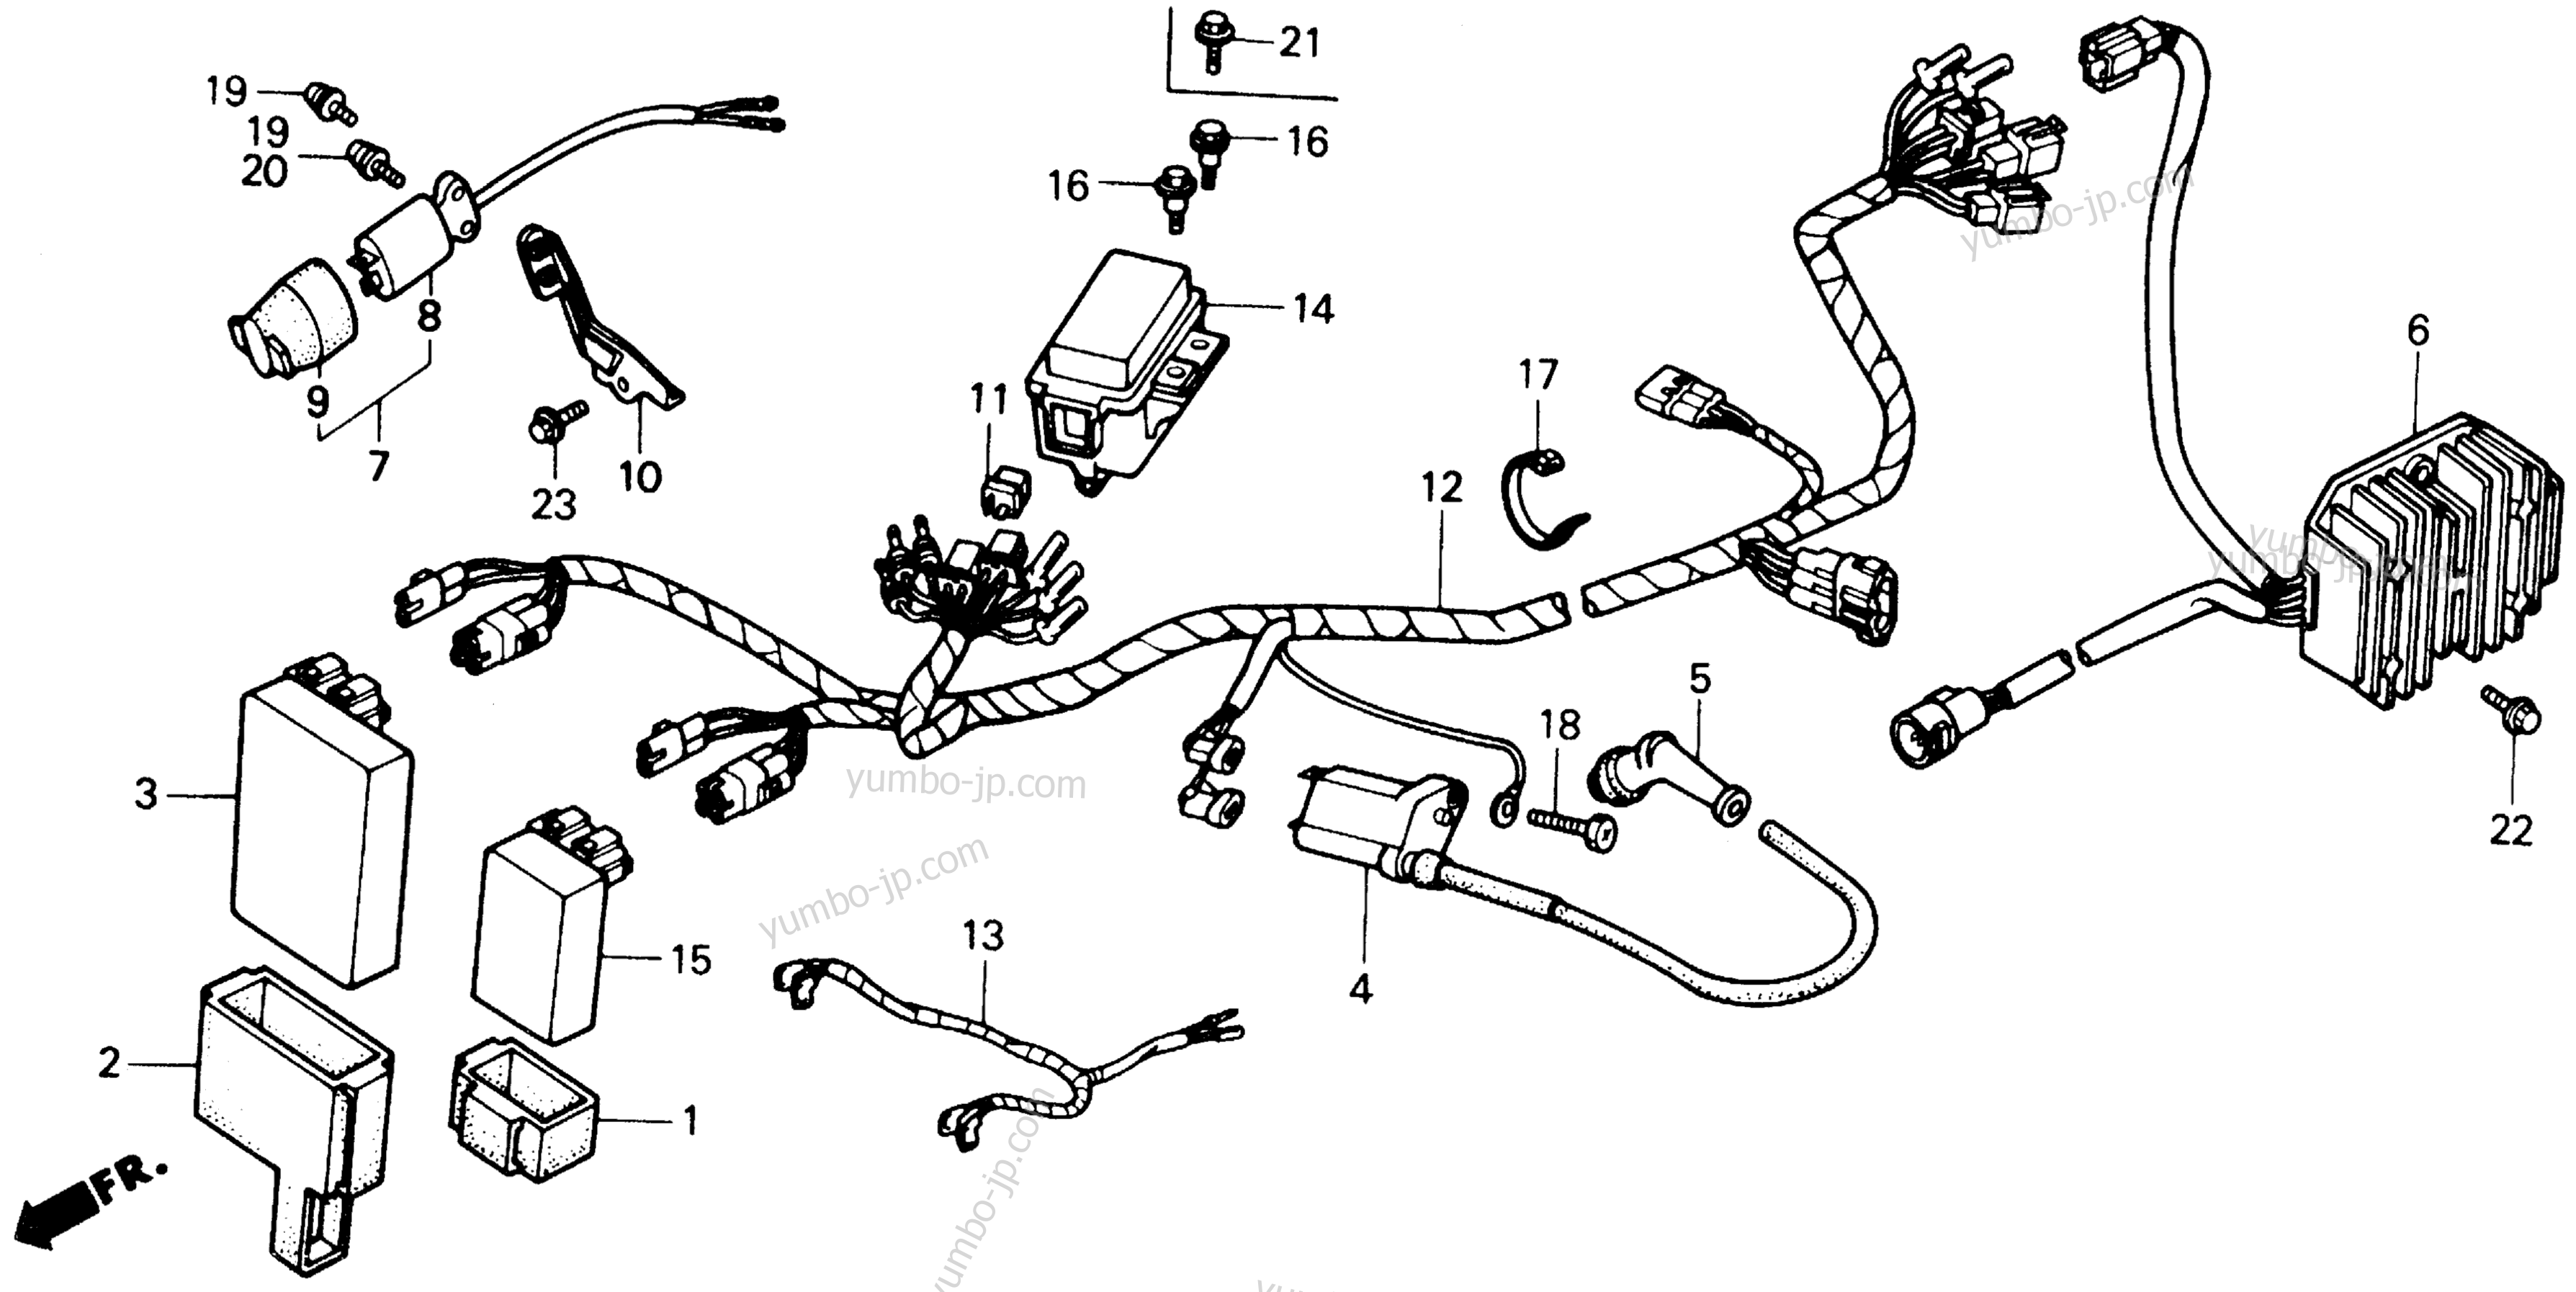 WIRE HARNESS for ATVs HONDA TRX300FW A 1988 year